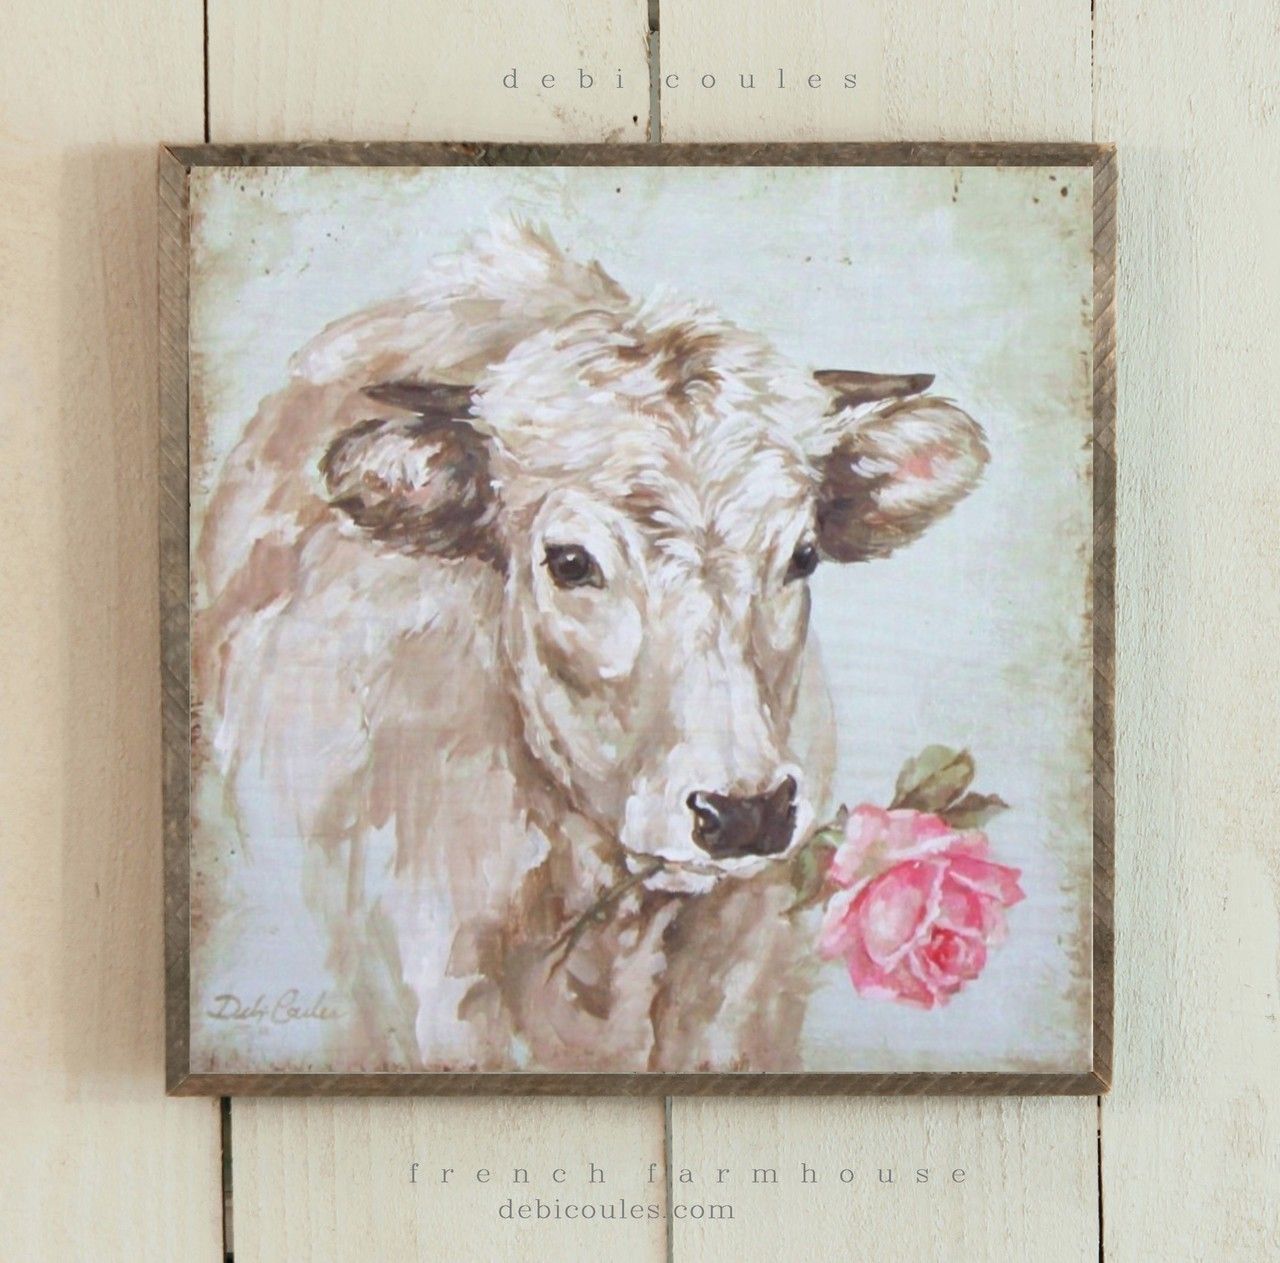 Barnwood Framed/Printed on Wood French Farmhouse French Cow with Rose by Debi Coules -   23 romantic country decor
 ideas